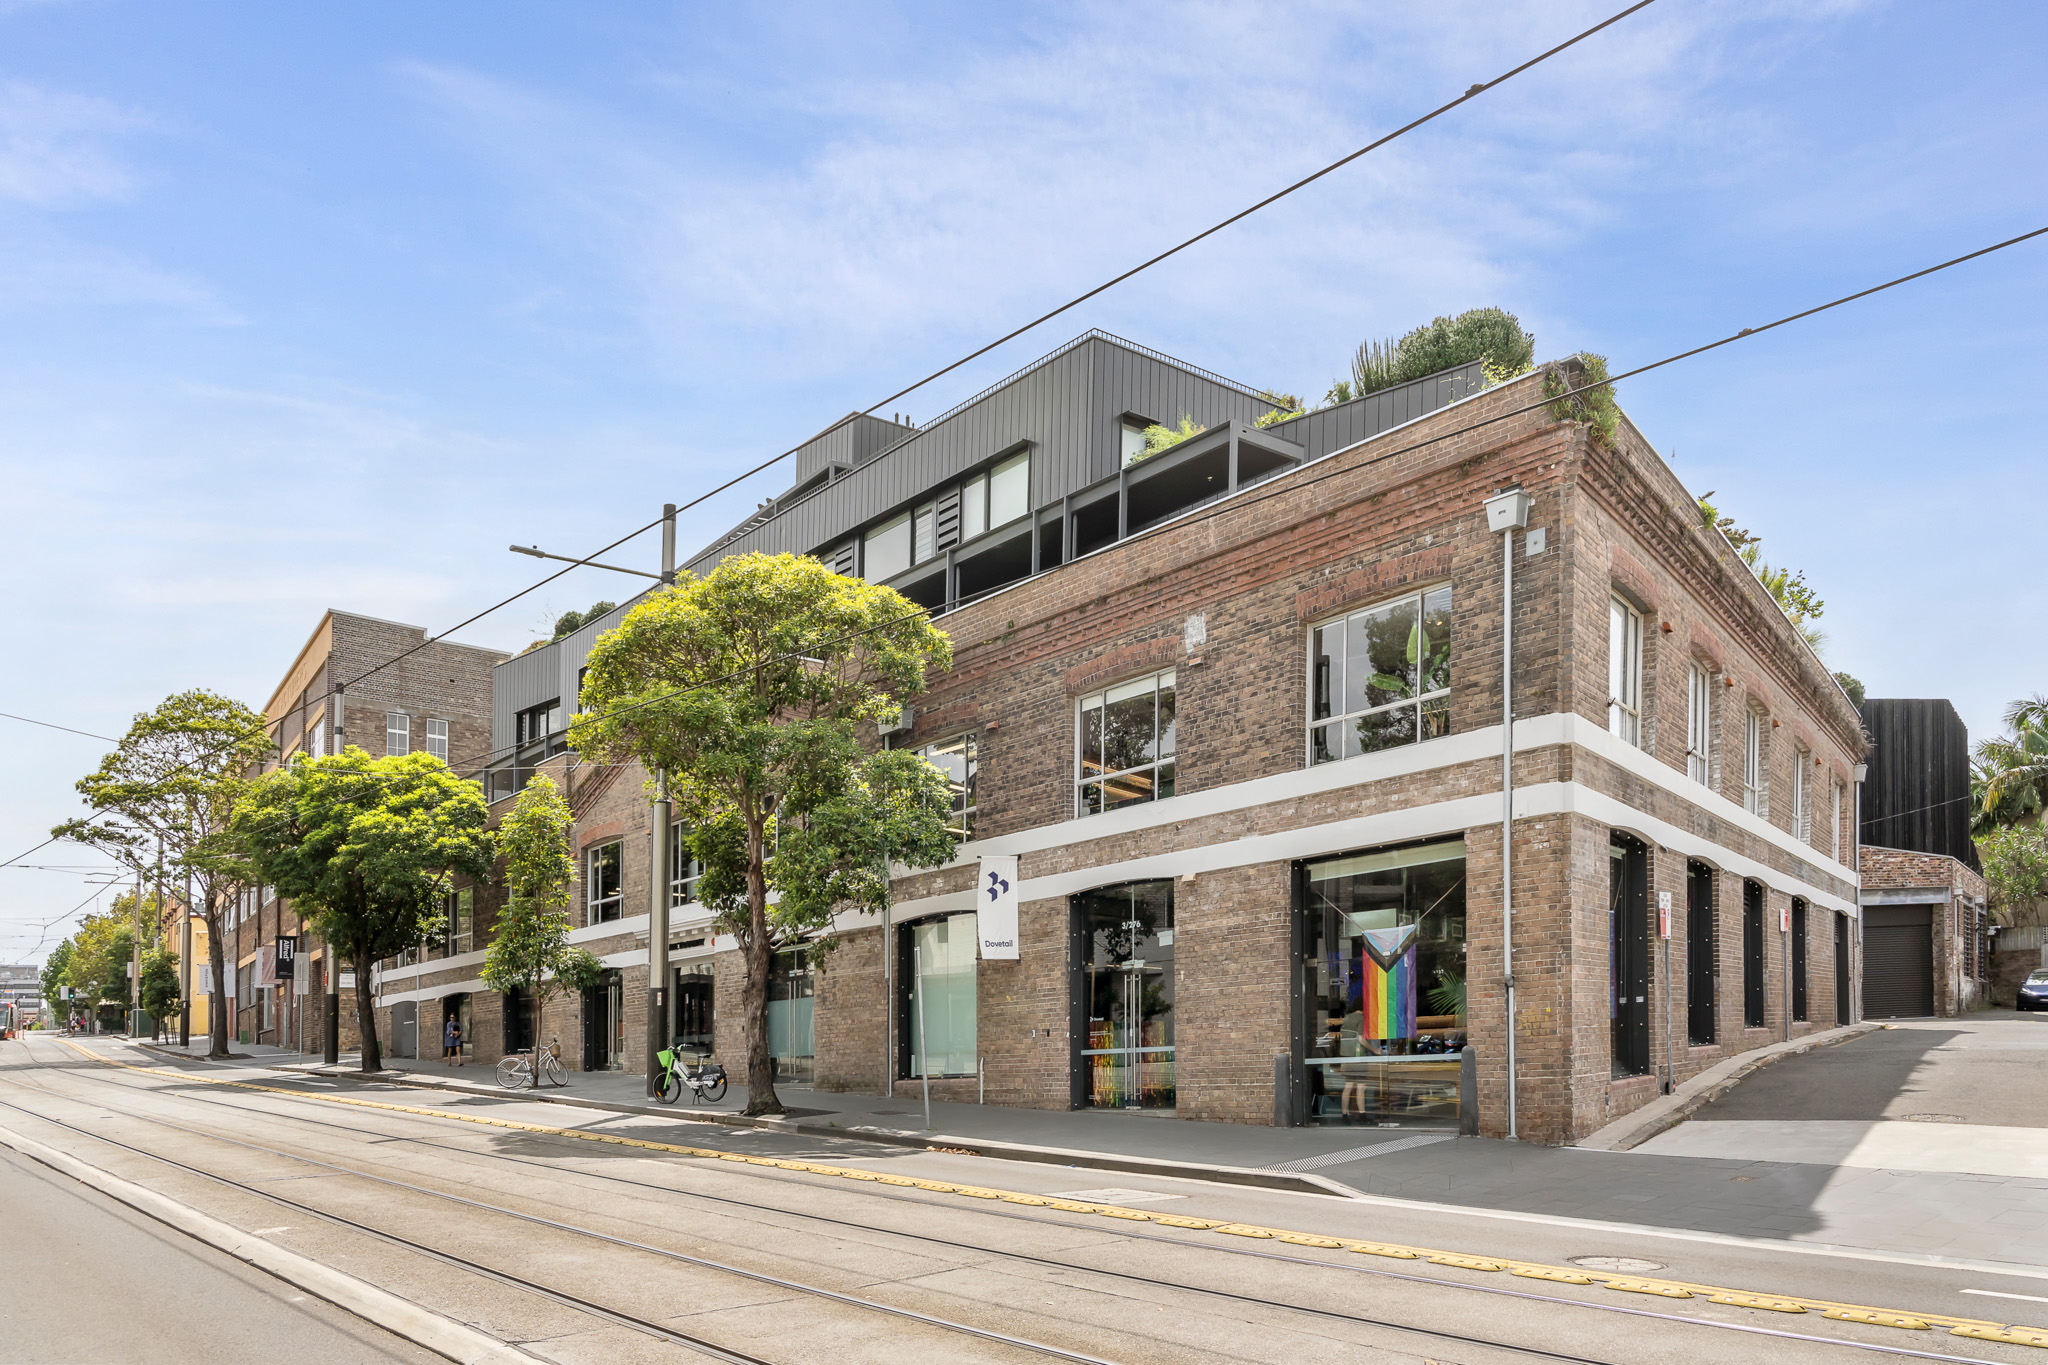 Exterior - One Bedroom Apartment - Urban Rest - The Tramway Apartments - Sydney